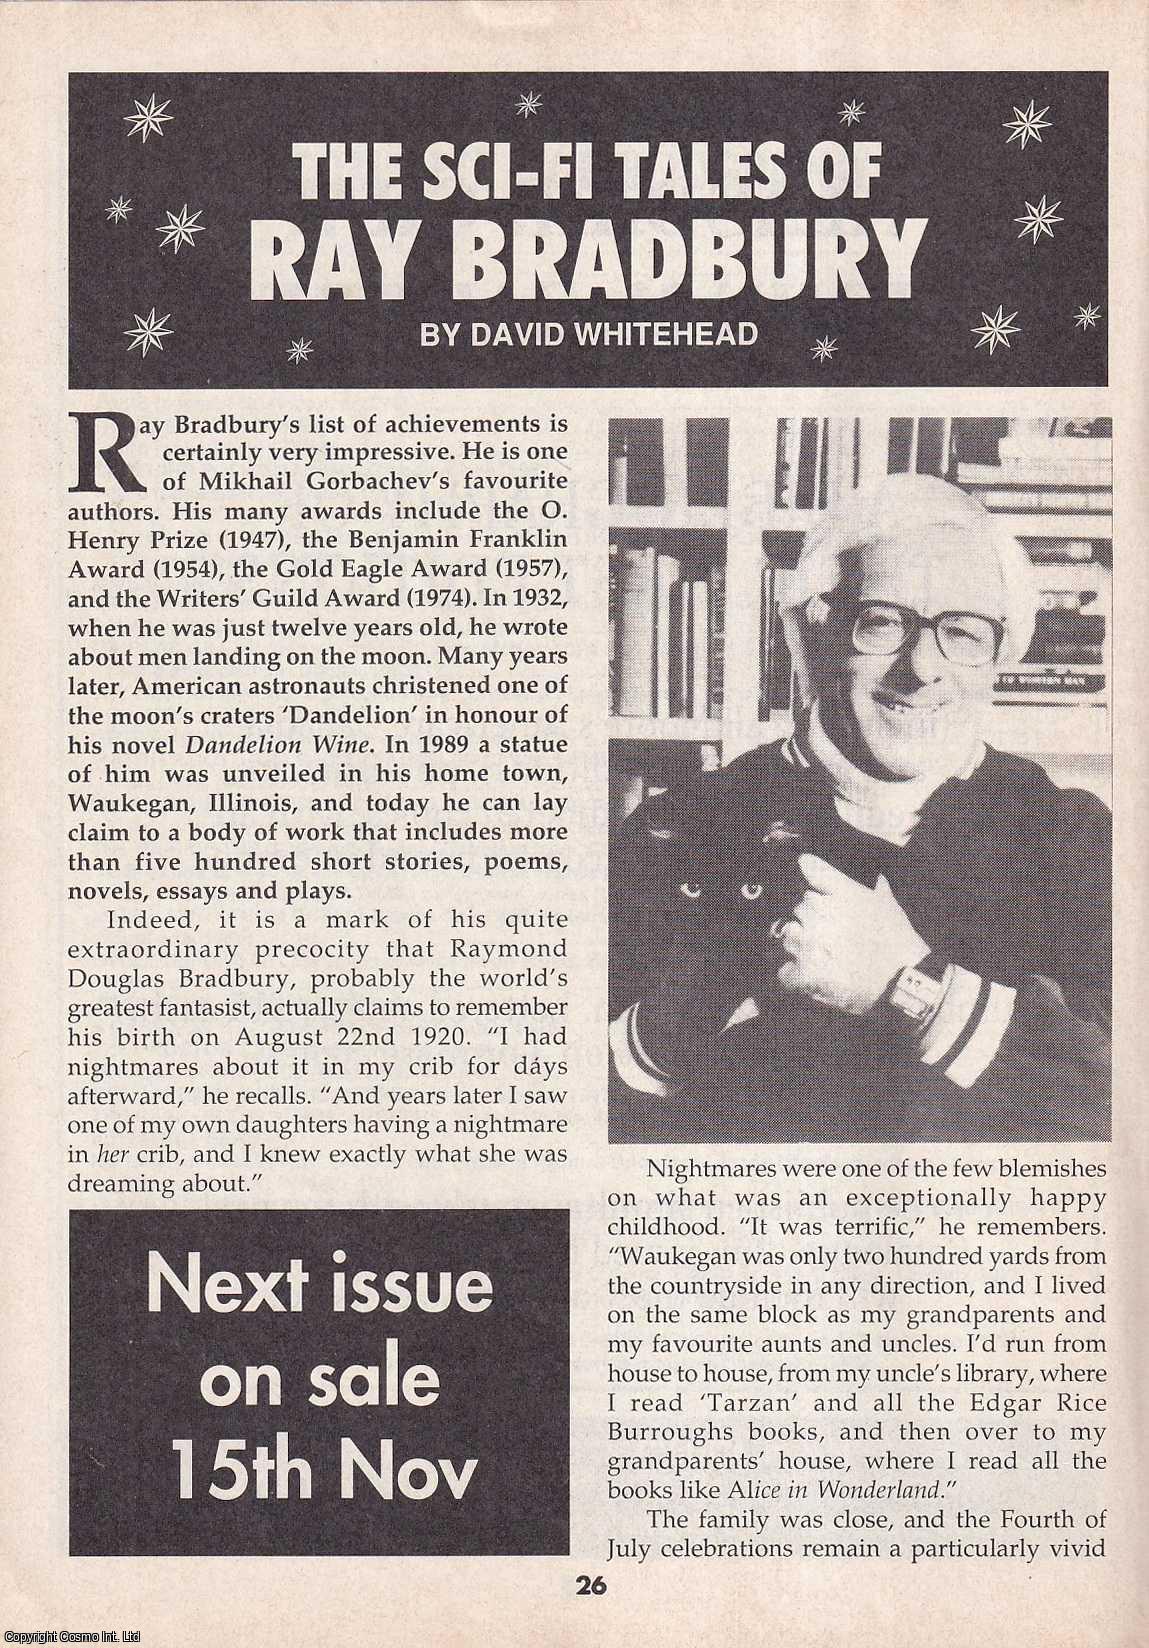 David Whitehead - The Sci-Fi Tales of Ray Bradbury. This is an original article separated from an issue of The Book & Magazine Collector publication.